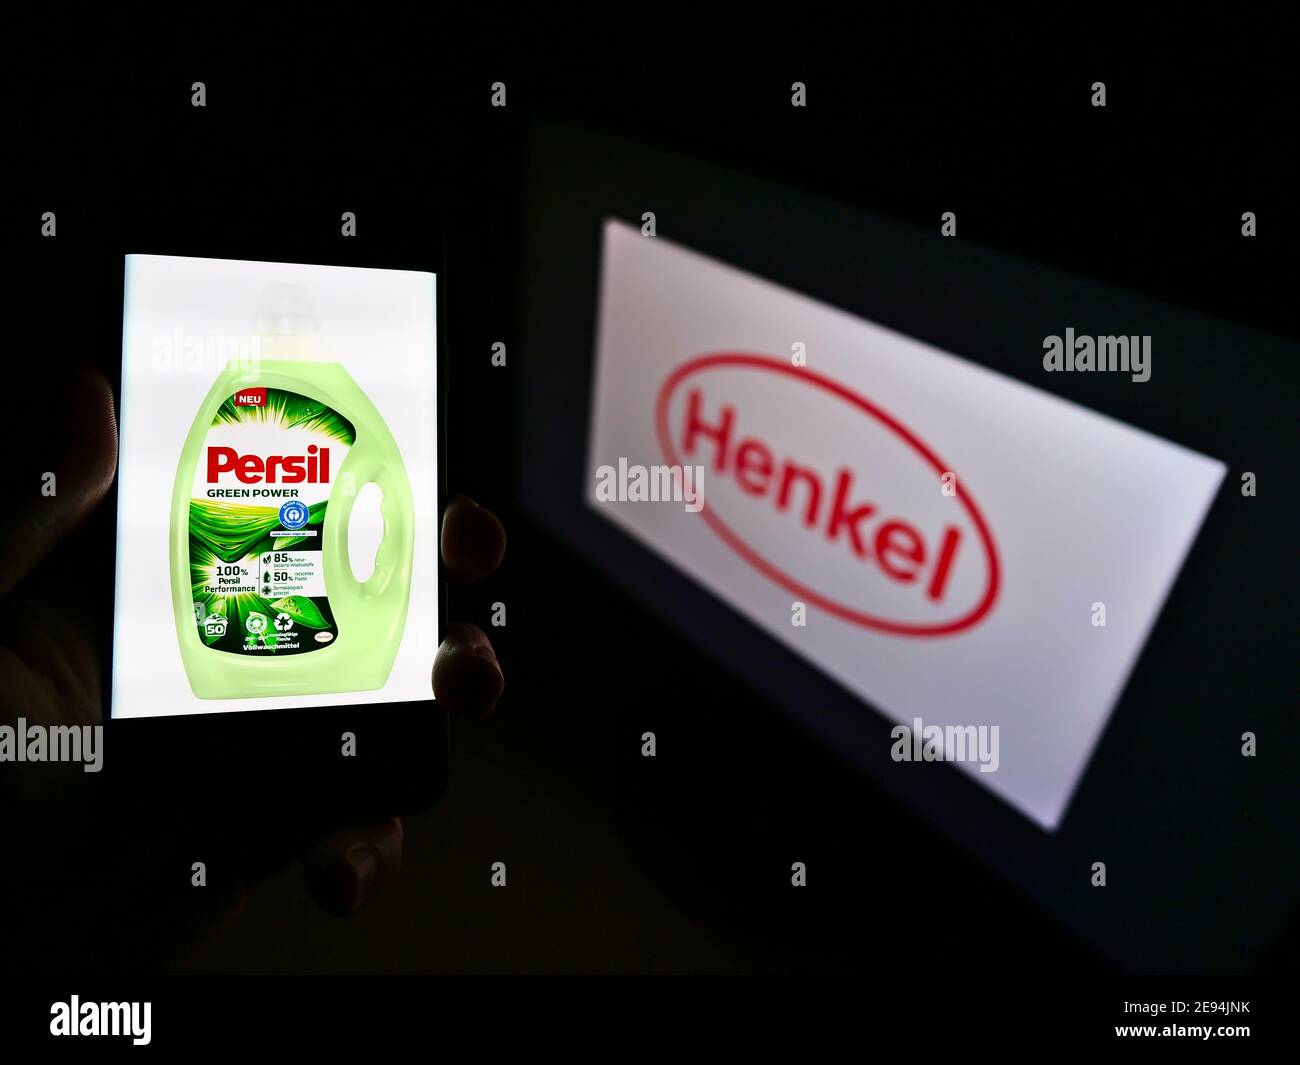 Person holding smartphone with laundry detergent product Persil on display marketed by company Henkel with logo in background. Focus on phone screen. Stock Photo